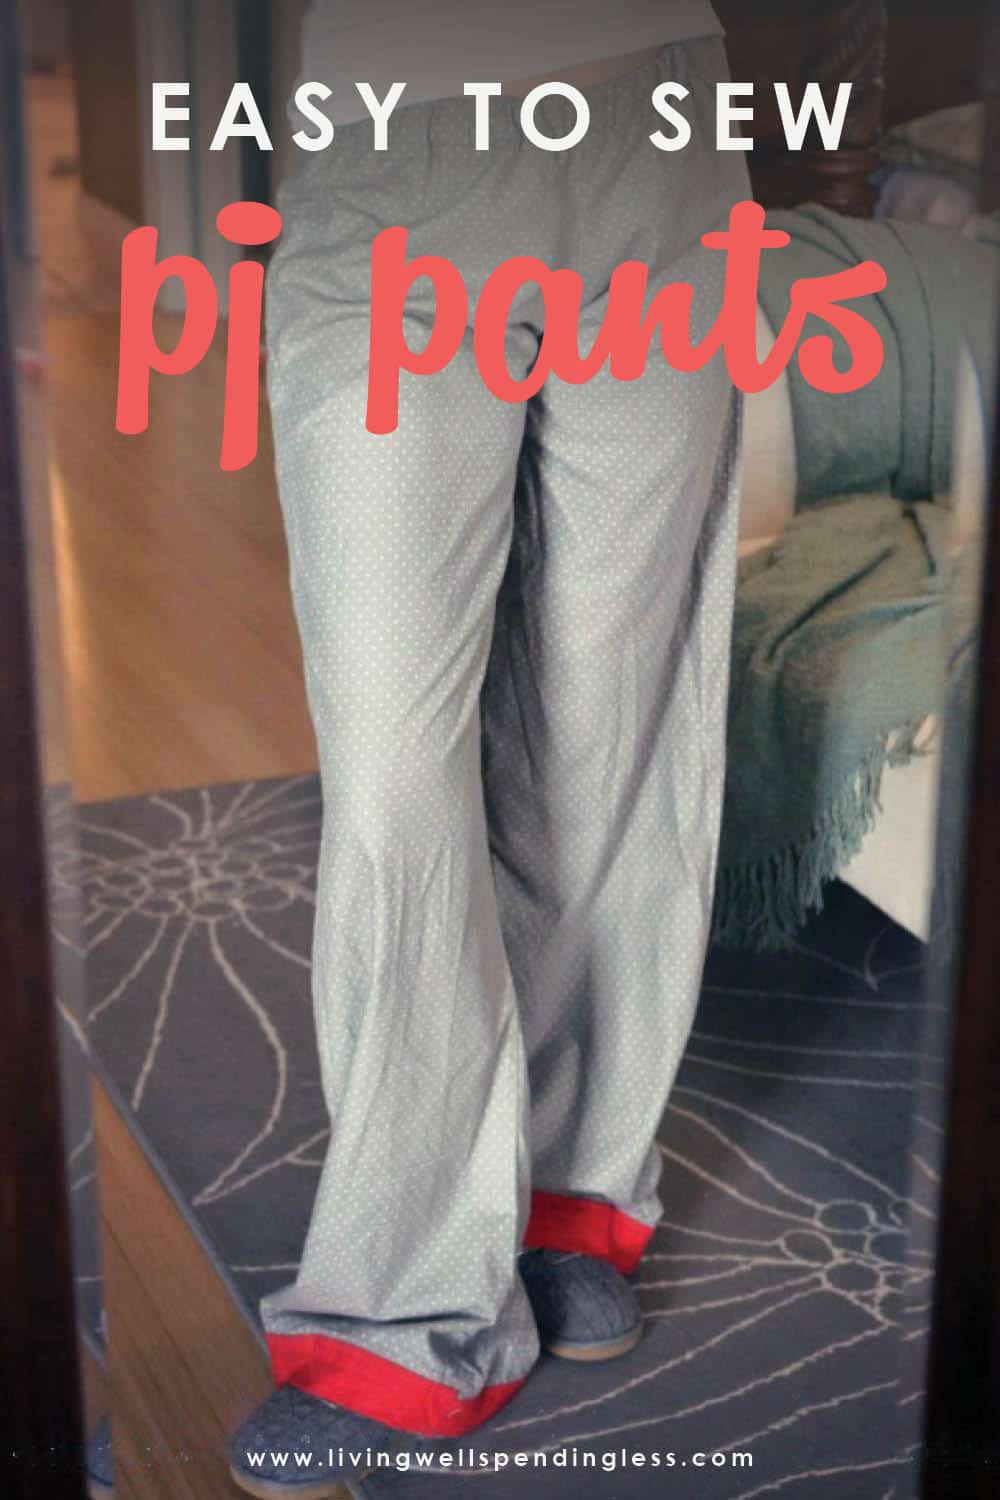 Are you ready to sew some adorable PJ pants for your whole family? This step-by-step tutorial shows you how to make easy-to-sew pajama pants in any size. #sewingprojects #diyprojects #easycrafts